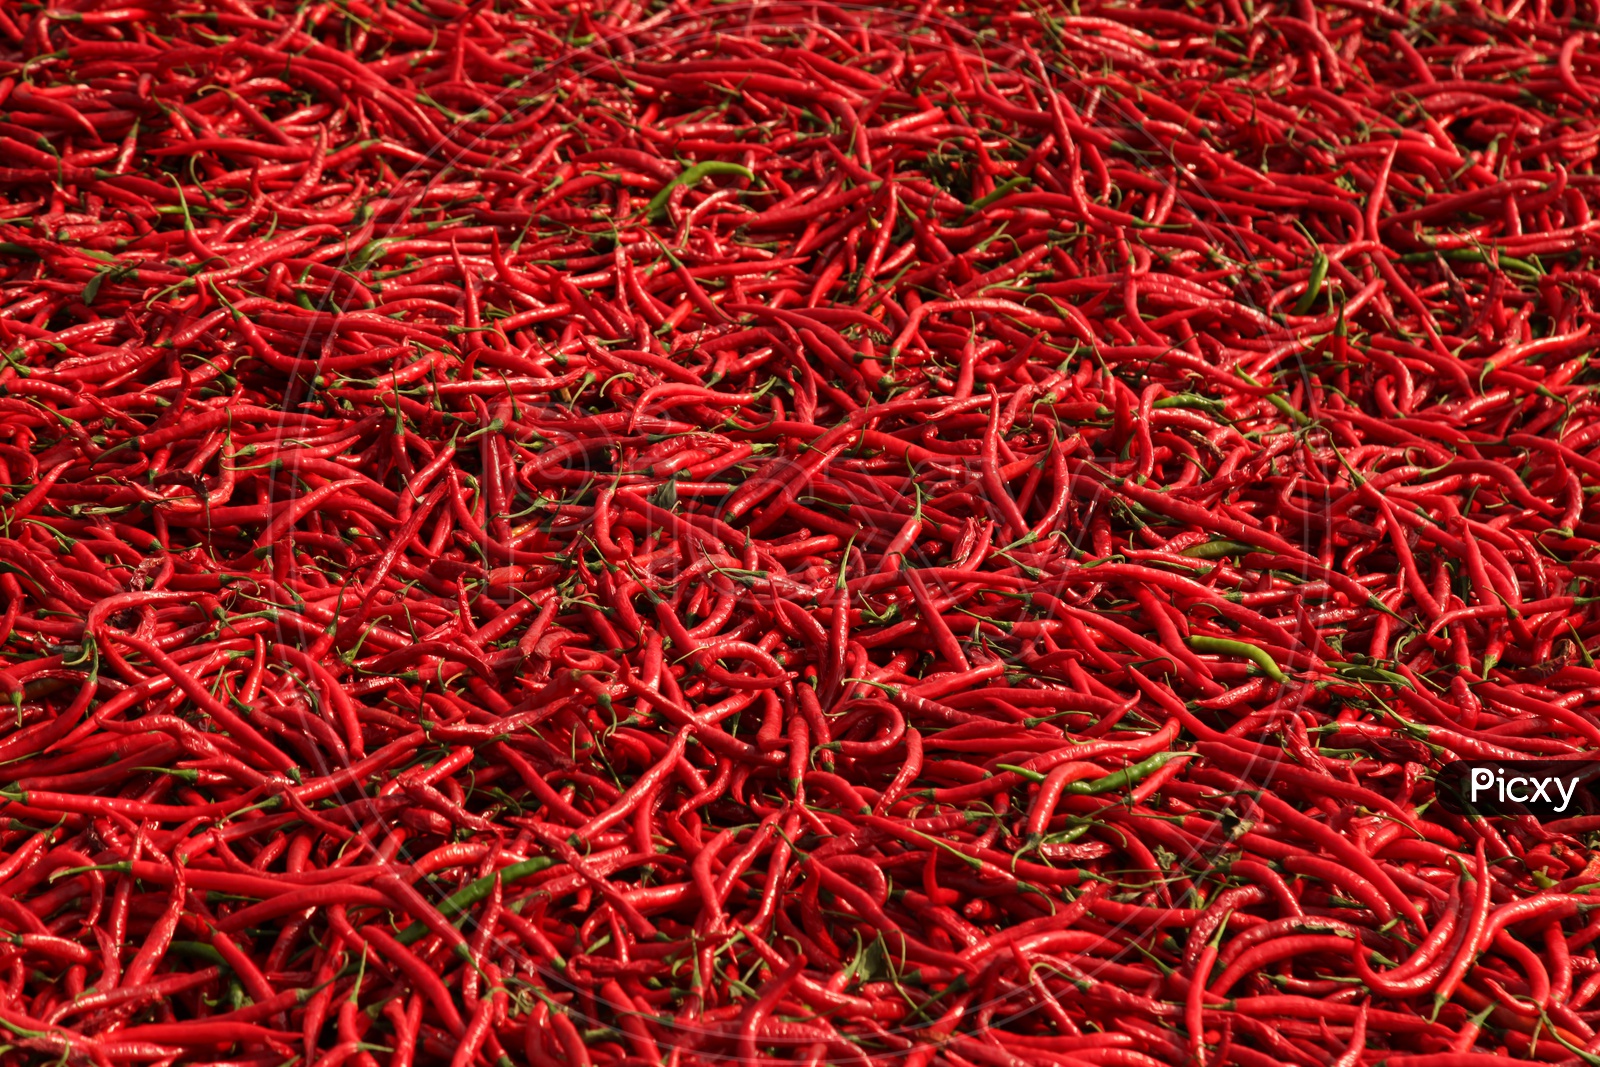 Red Chili Harvest Yield  in India